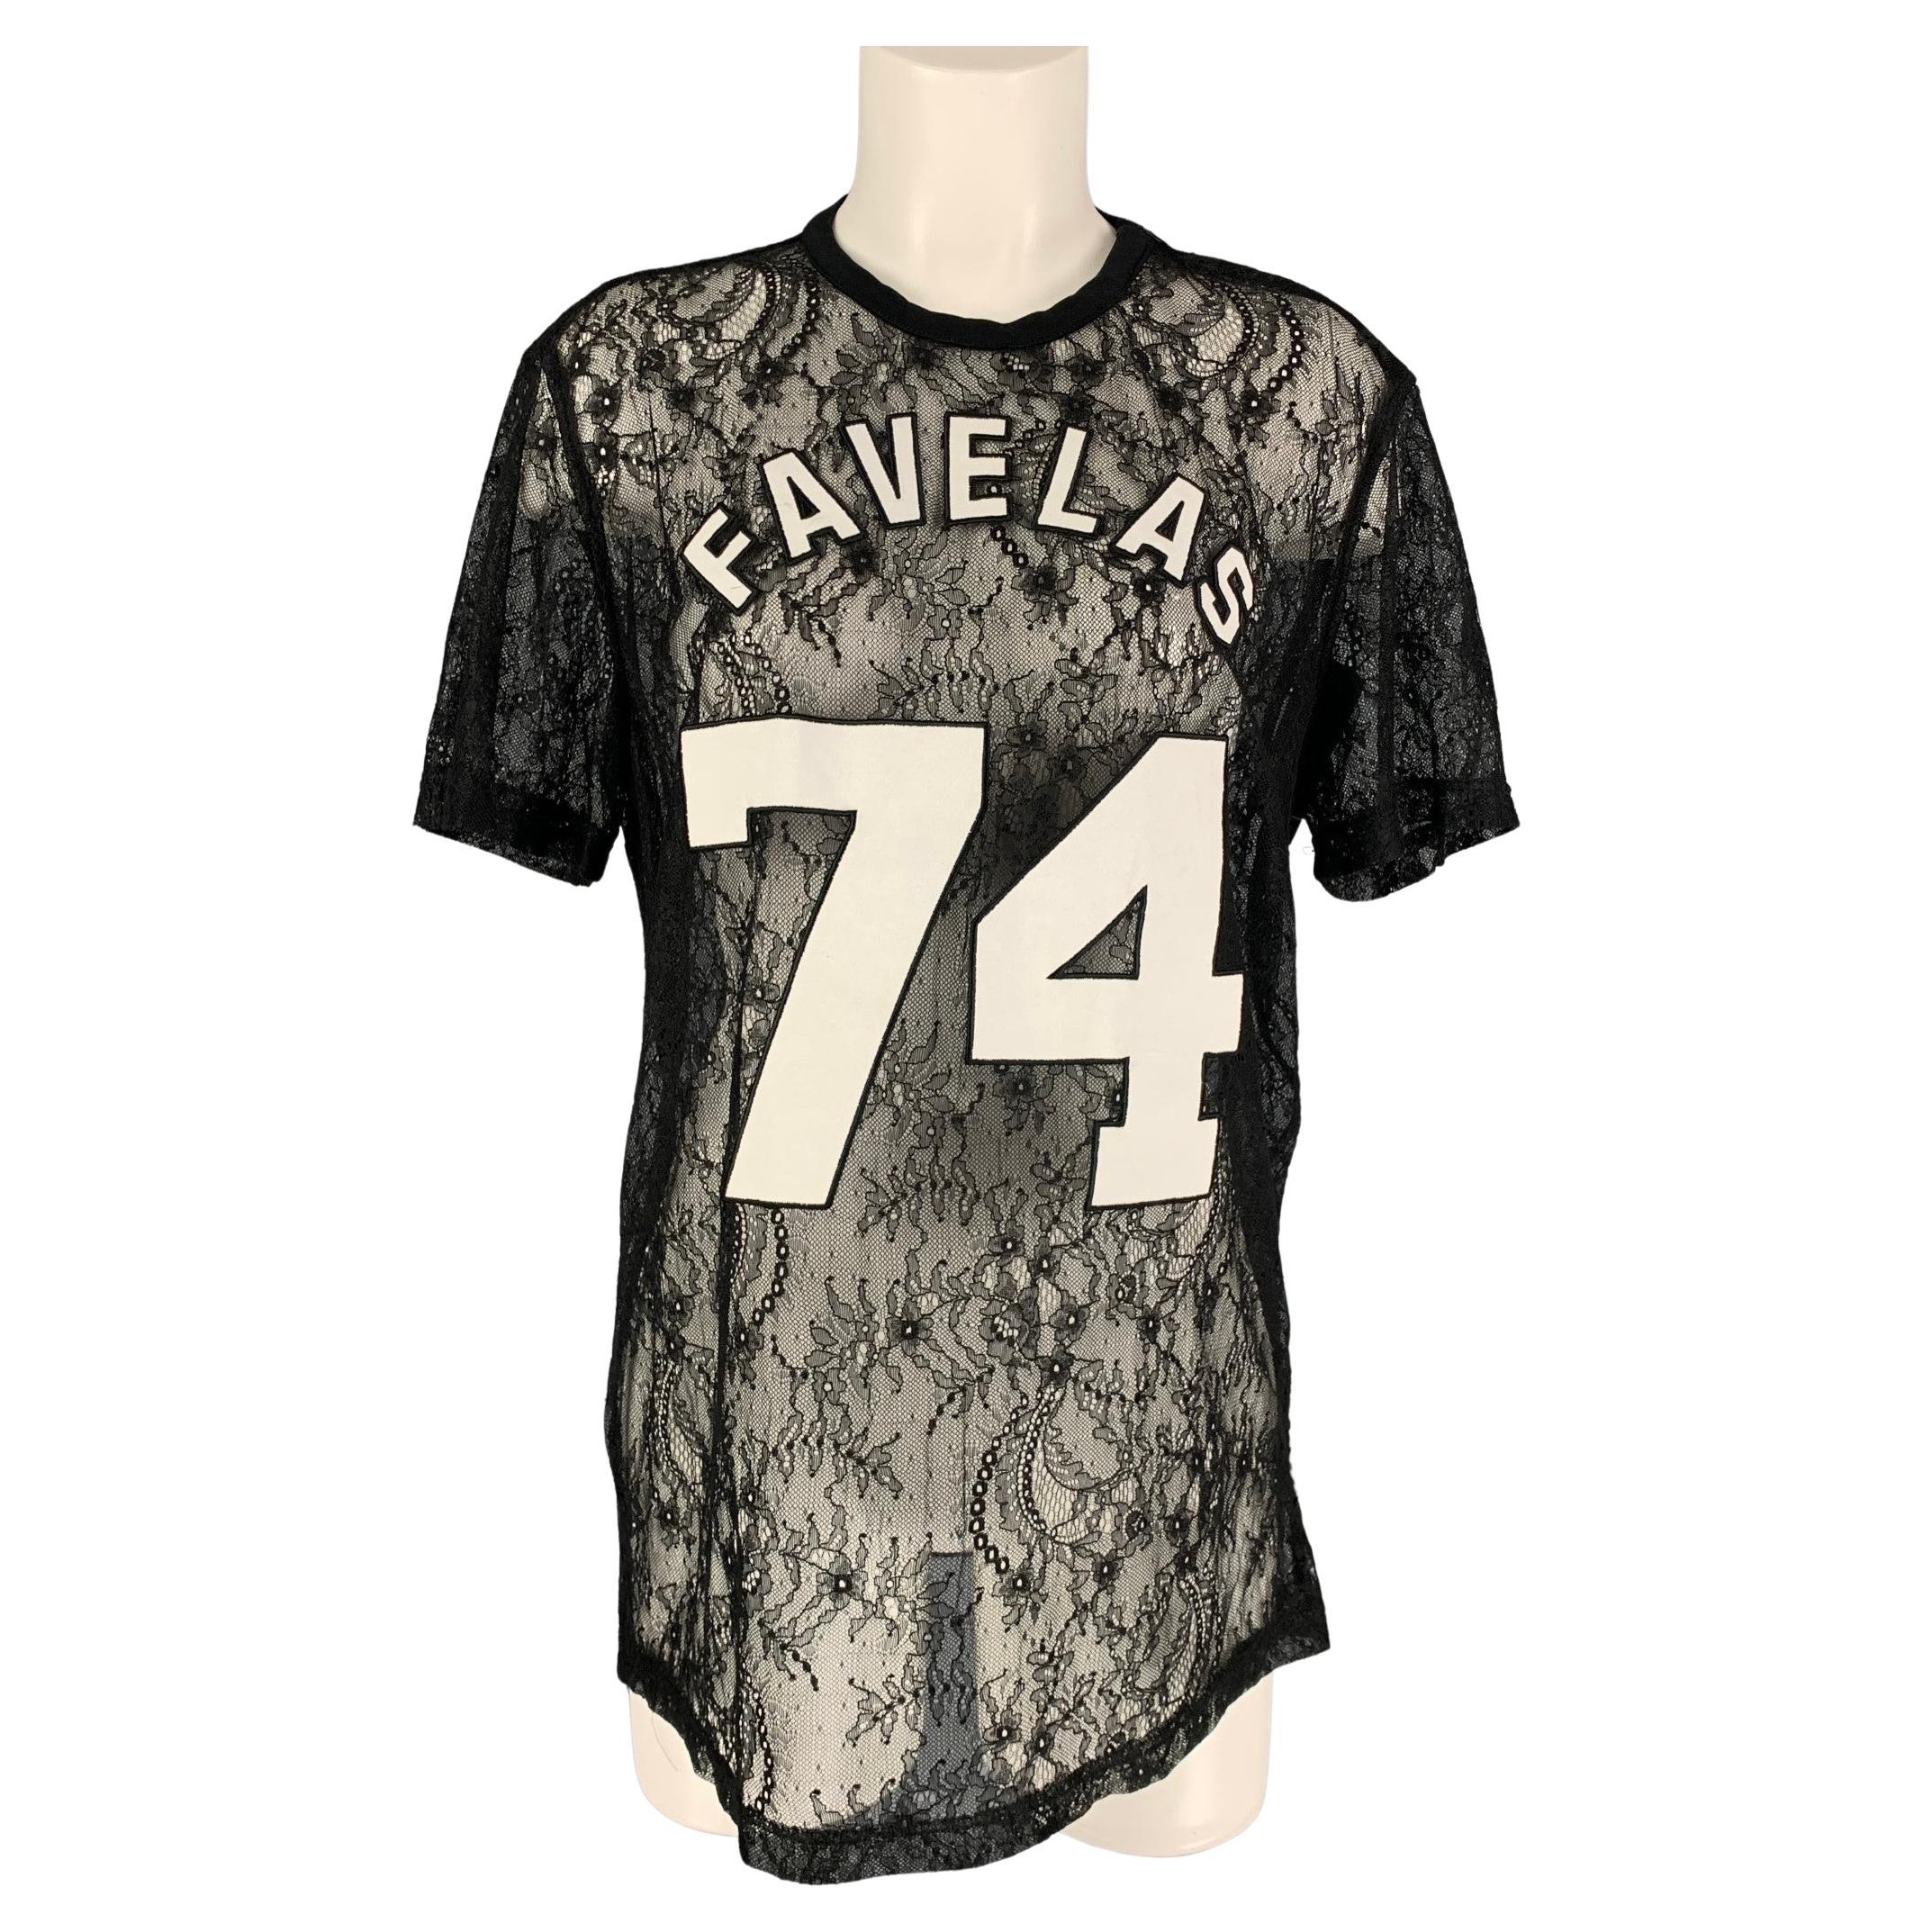 GIVENCHY Fall 2014 Size S Black White Favelas 74 Lace Crew-Neck T-Shirt